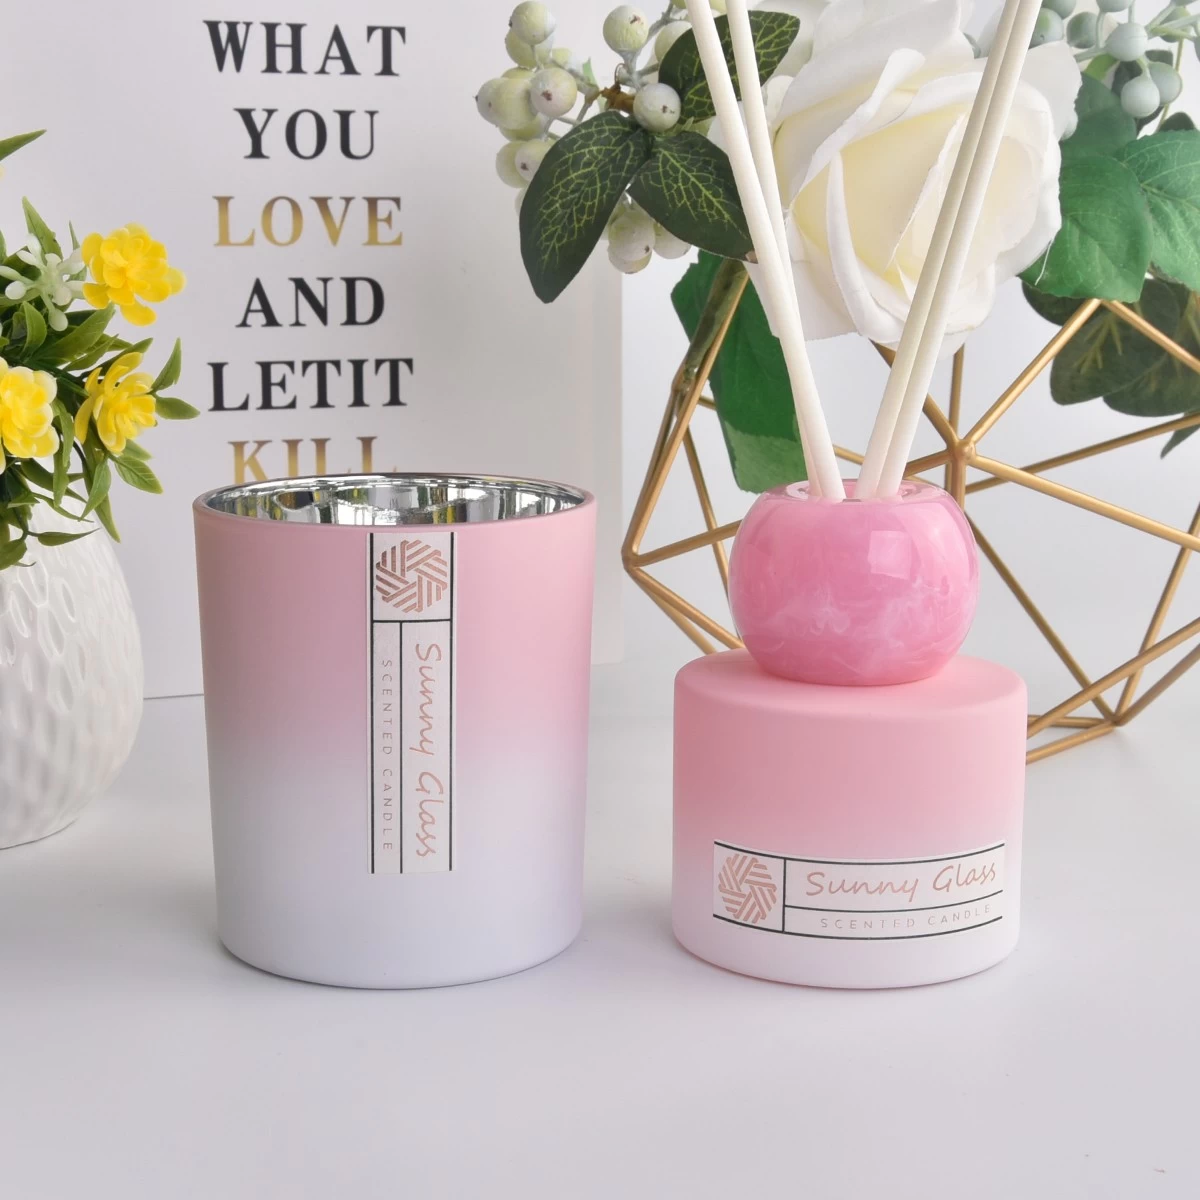 Wholesale high quality gradual change pink glass candle jar and diffuser bottle suit for home decor